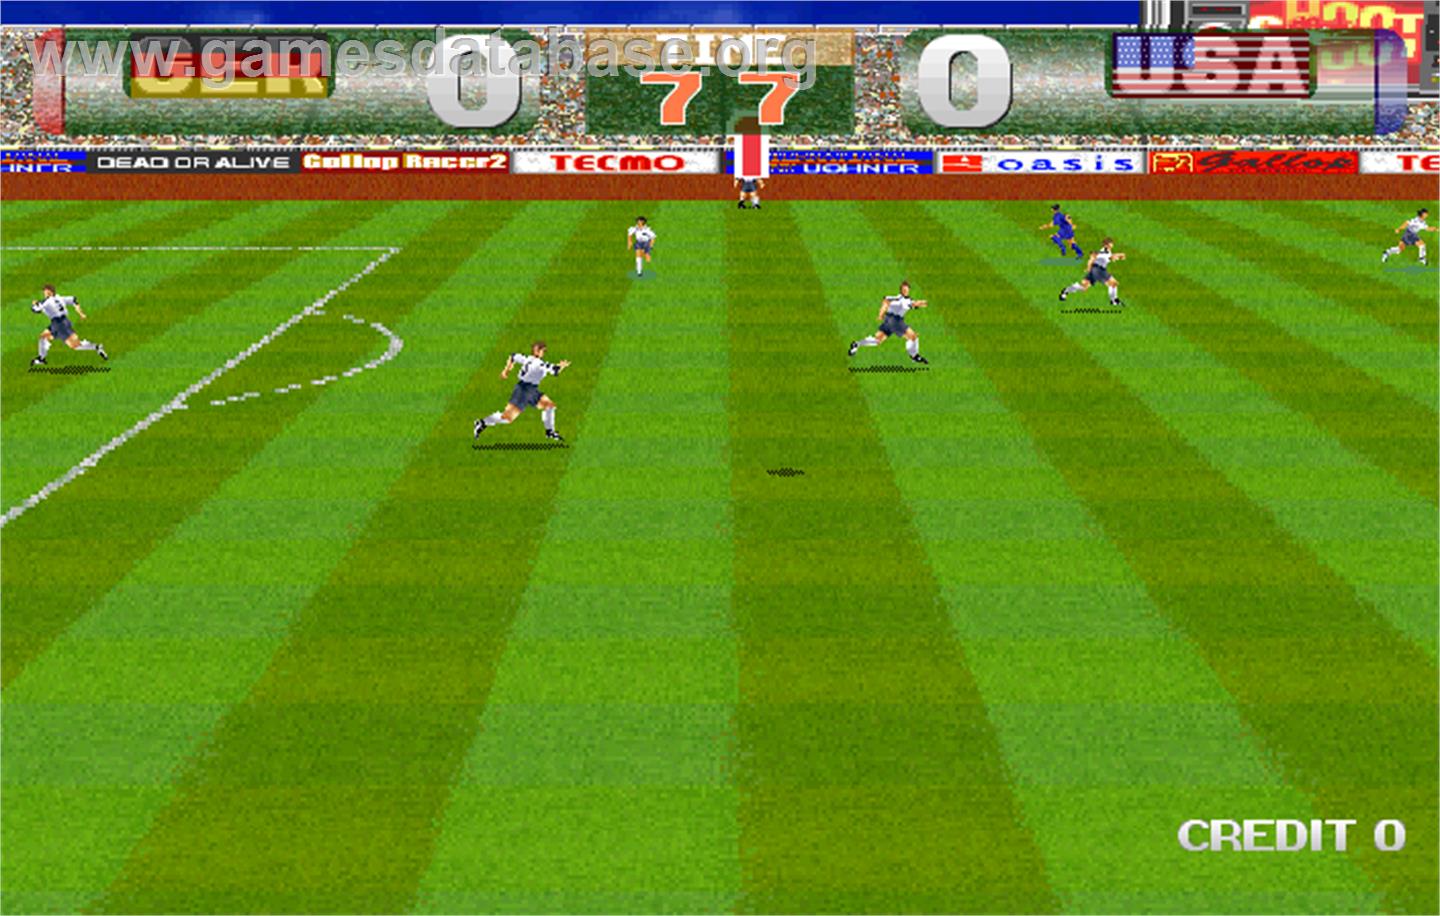 Tecmo World Cup '98 - Arcade - Artwork - In Game